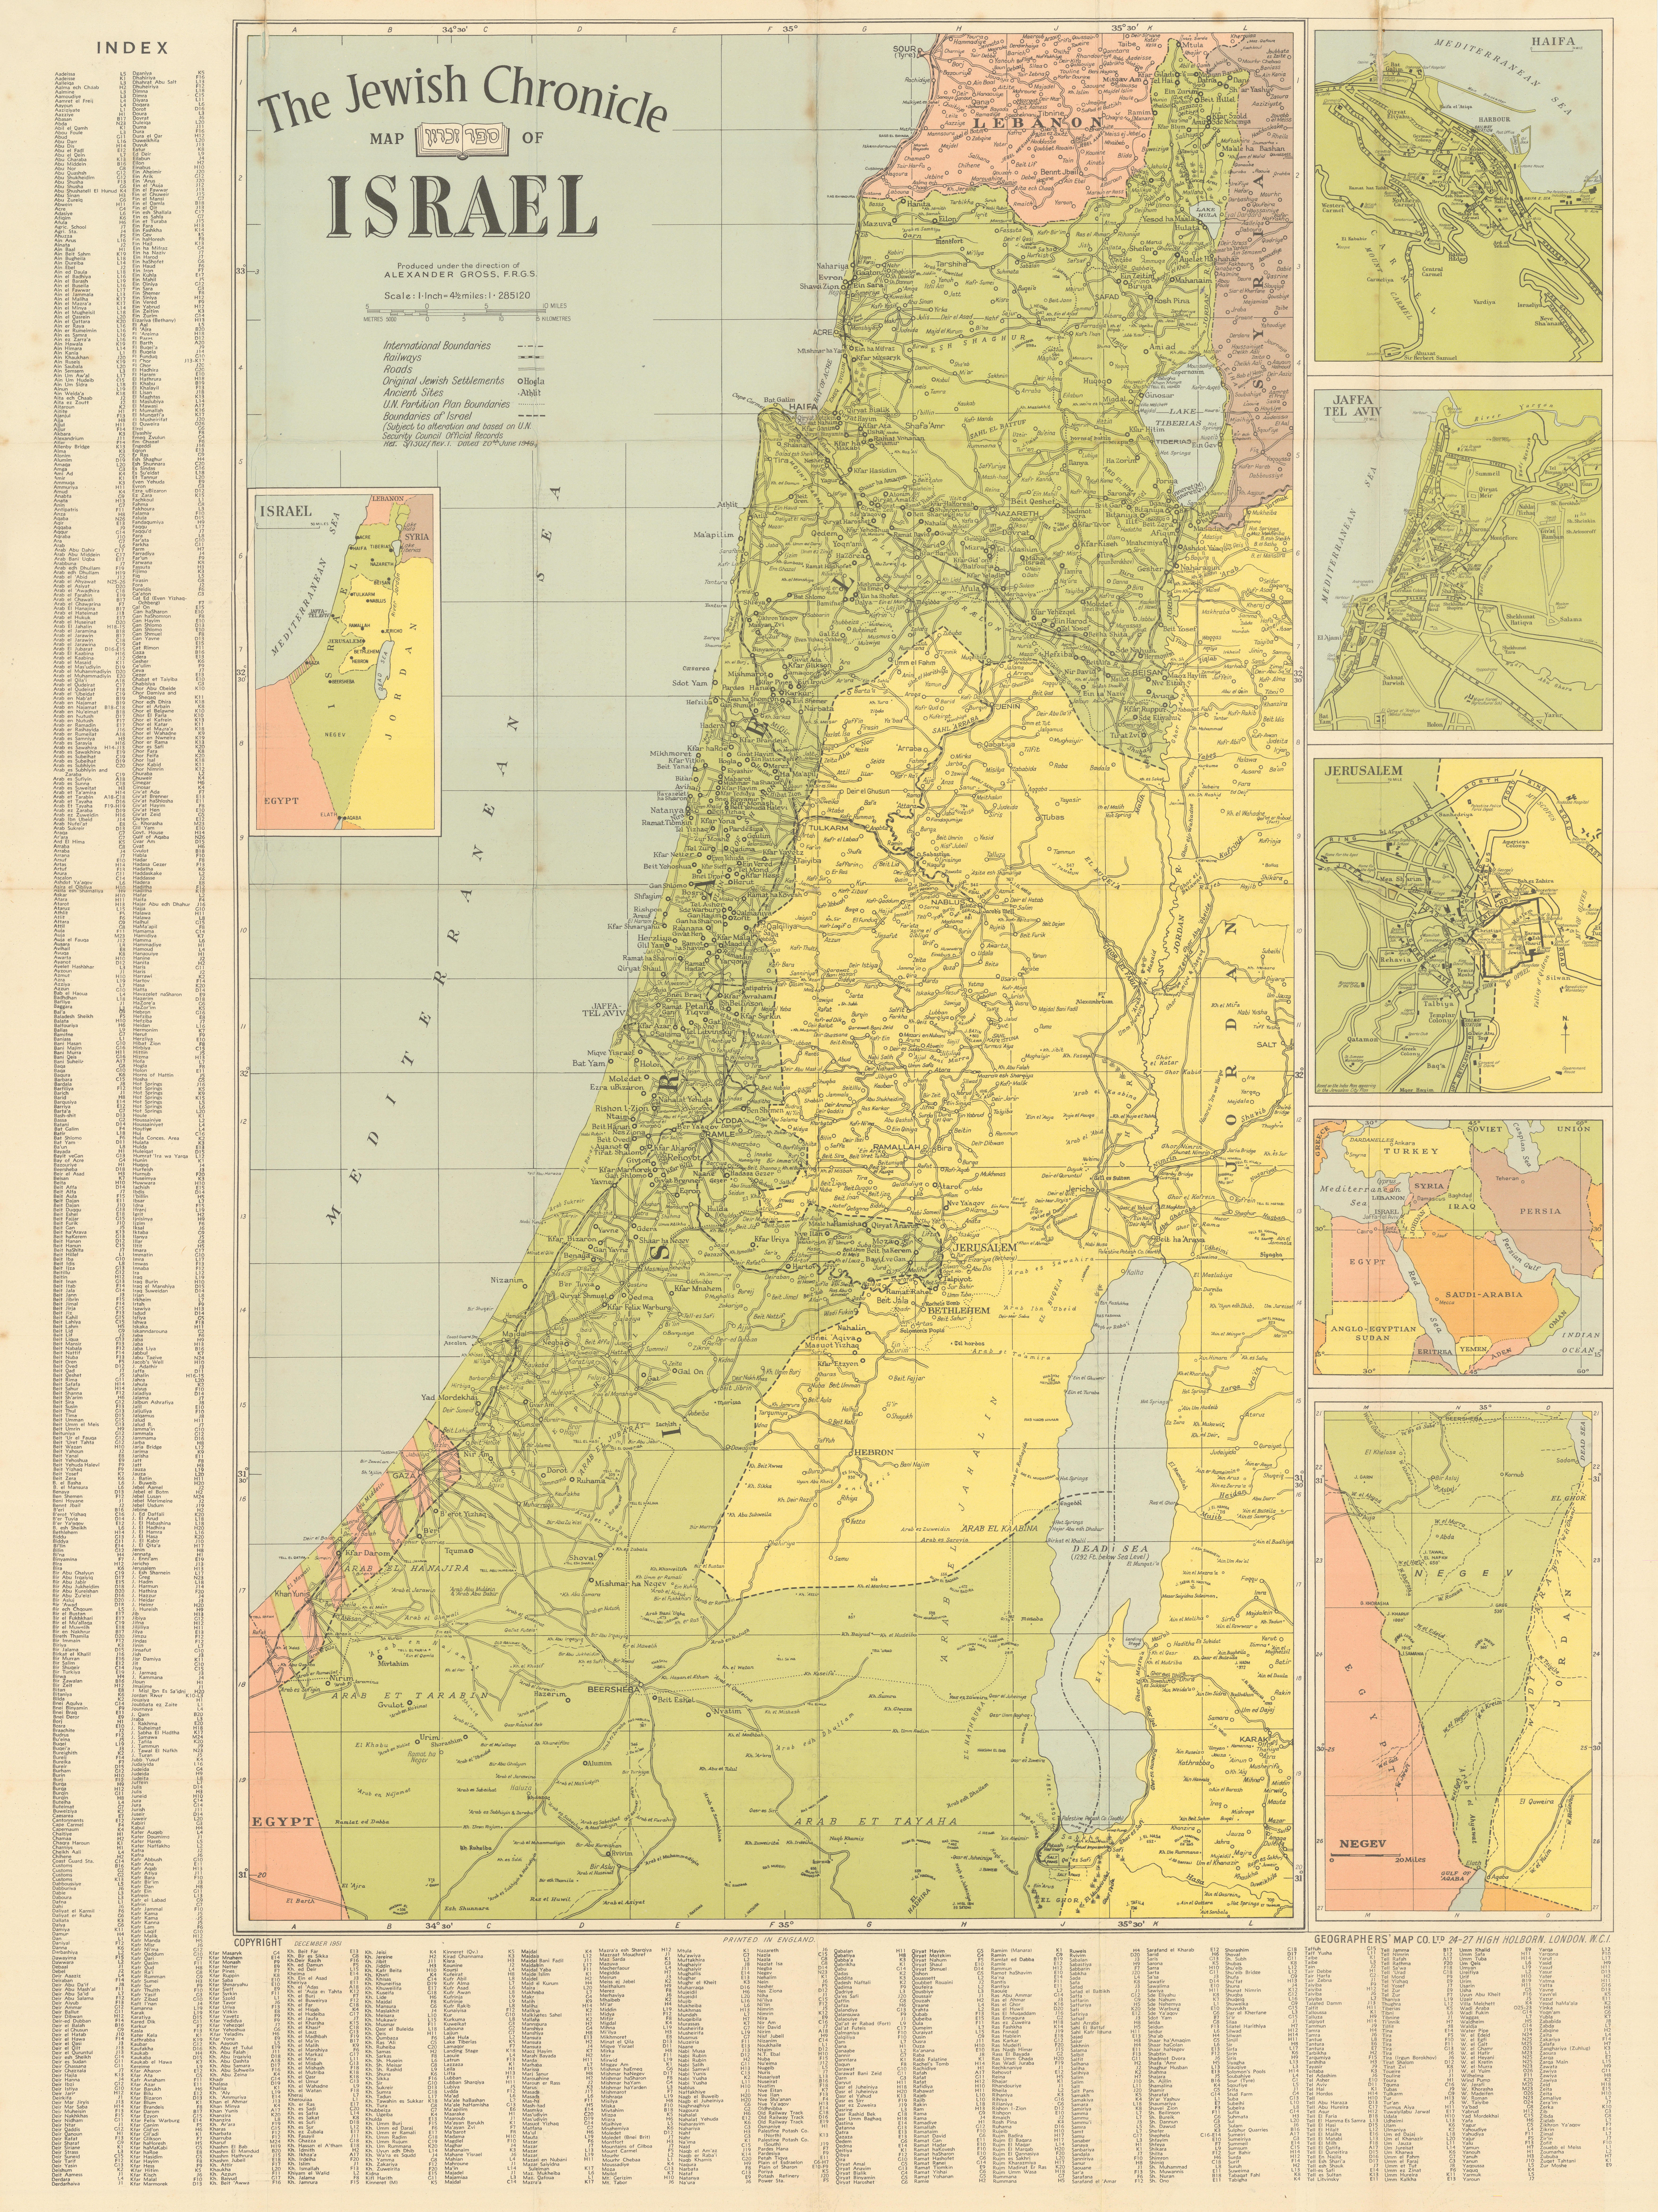 The Jewish Chronicle map of Israel by Alexander Gross. Folding 100x75cm 1951